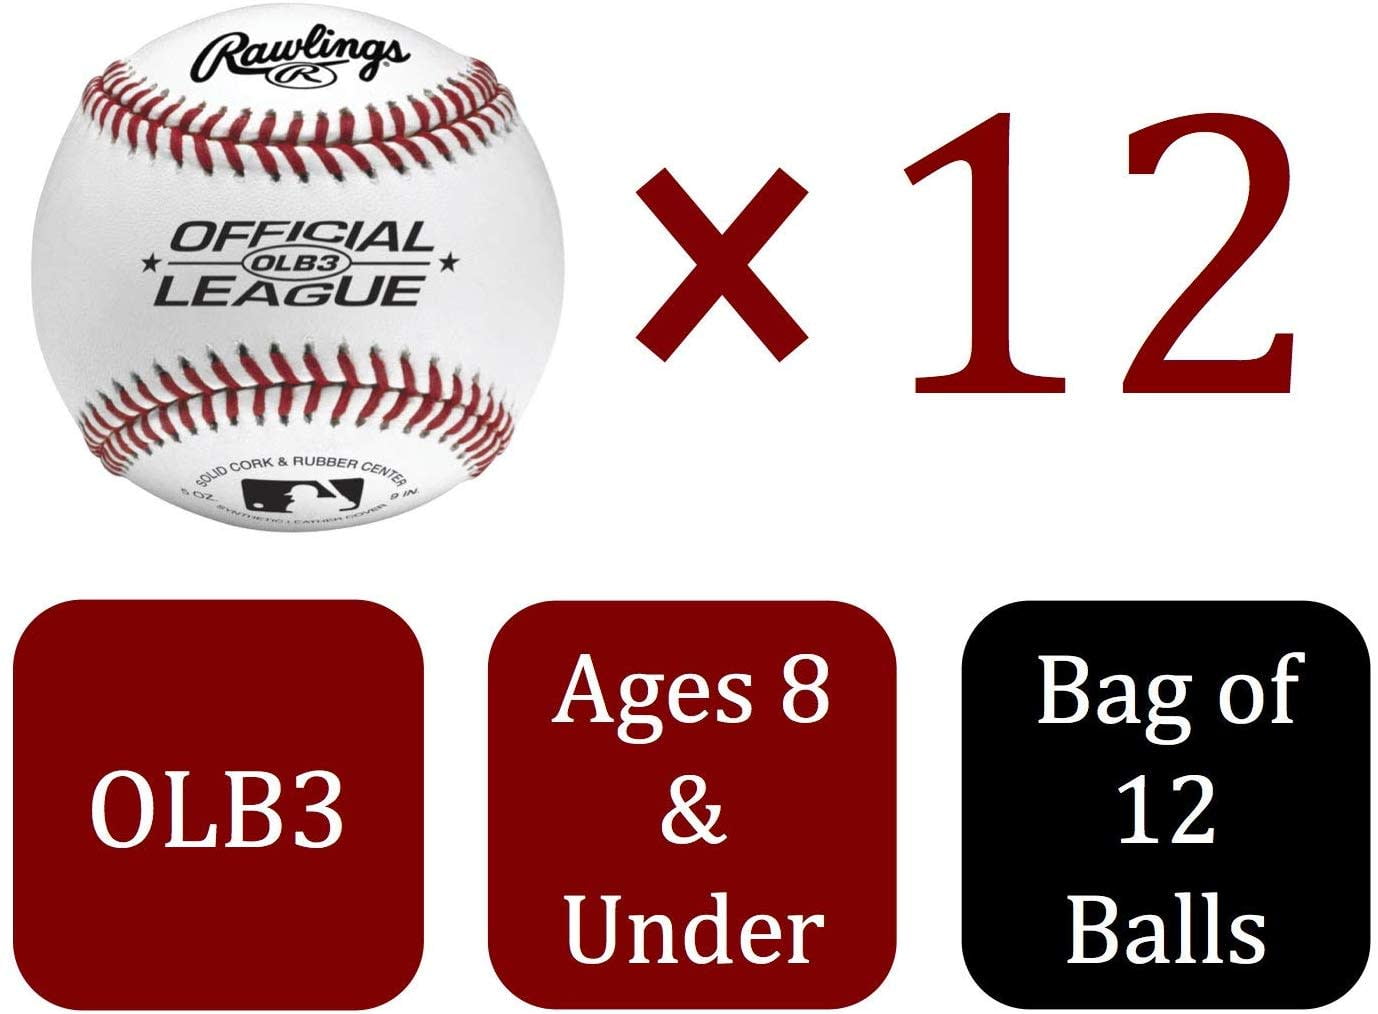 Rawlings 8U Official League OLB3 Practice Youth Baseballs in Mesh Bag, 12 Pieces